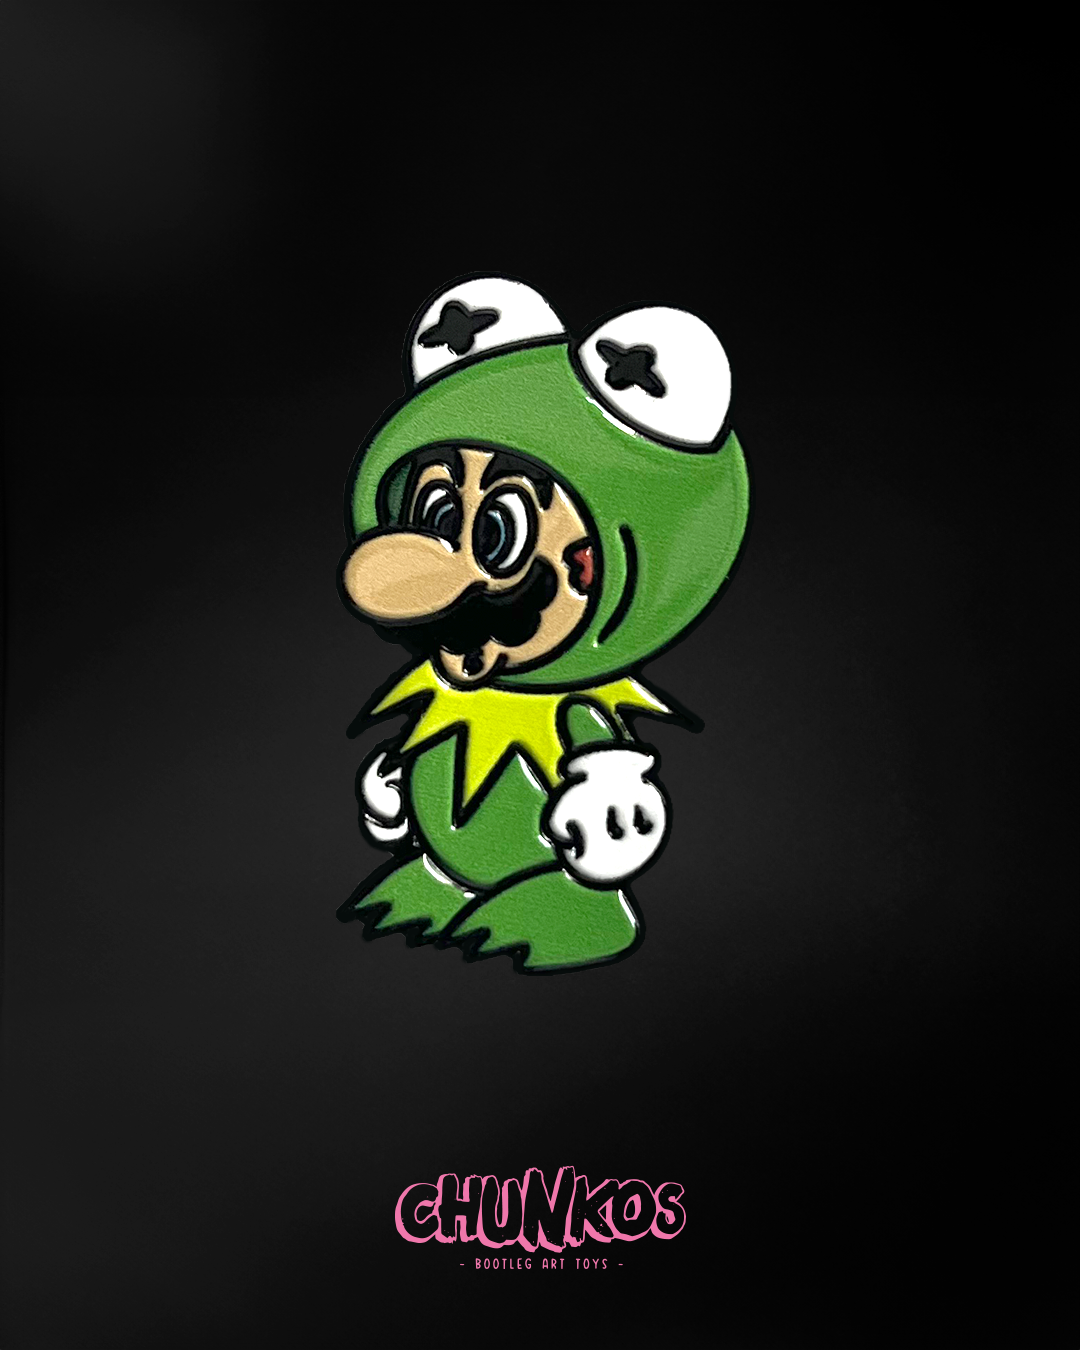 Super Frog Bros Pin Badge - Limited Edition